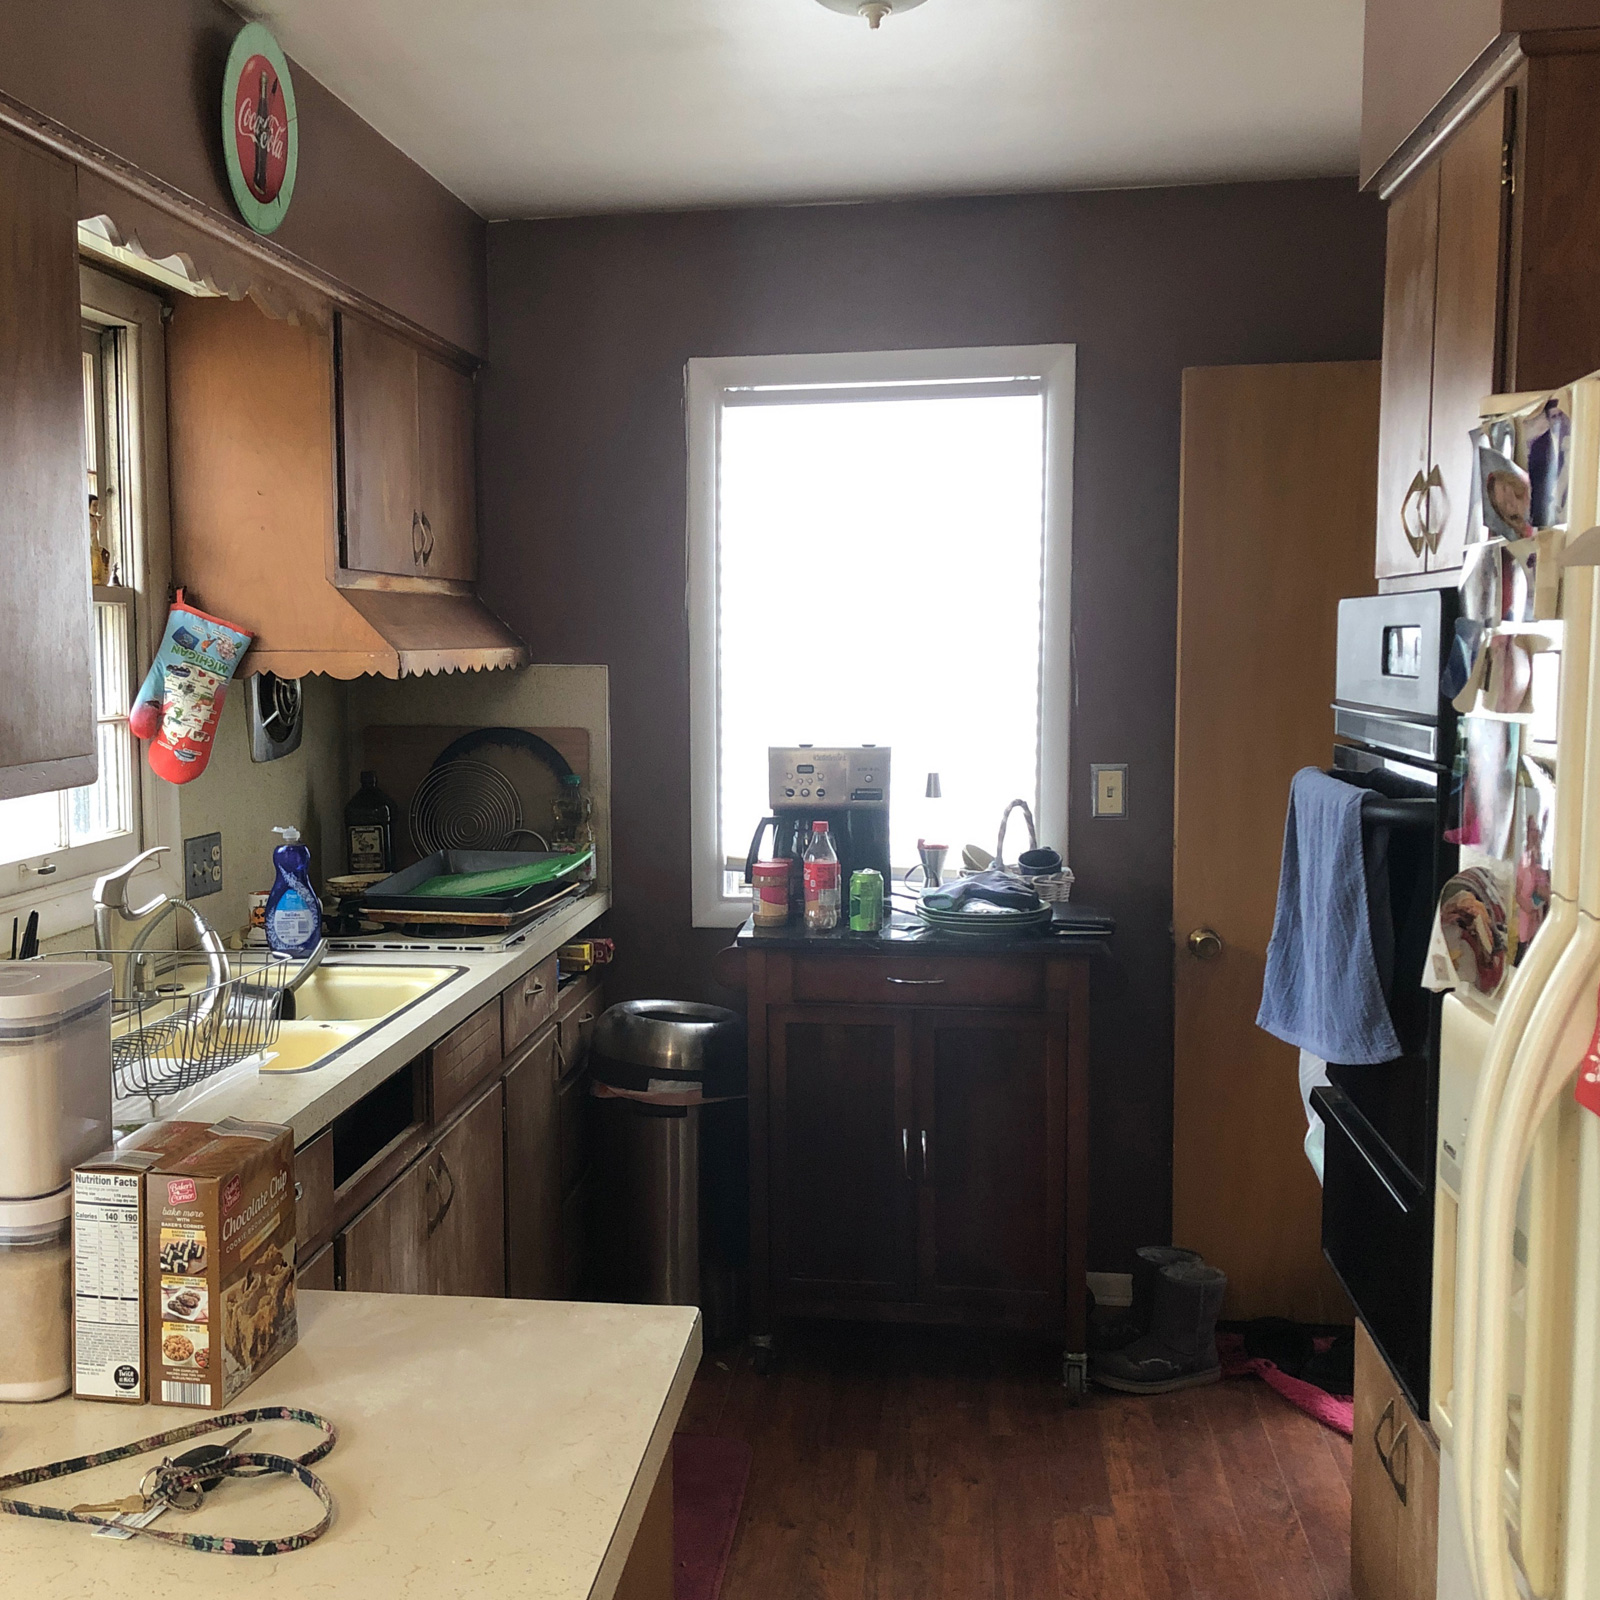 Entry 87 - It's time for a makeover of each major component this kitchen space